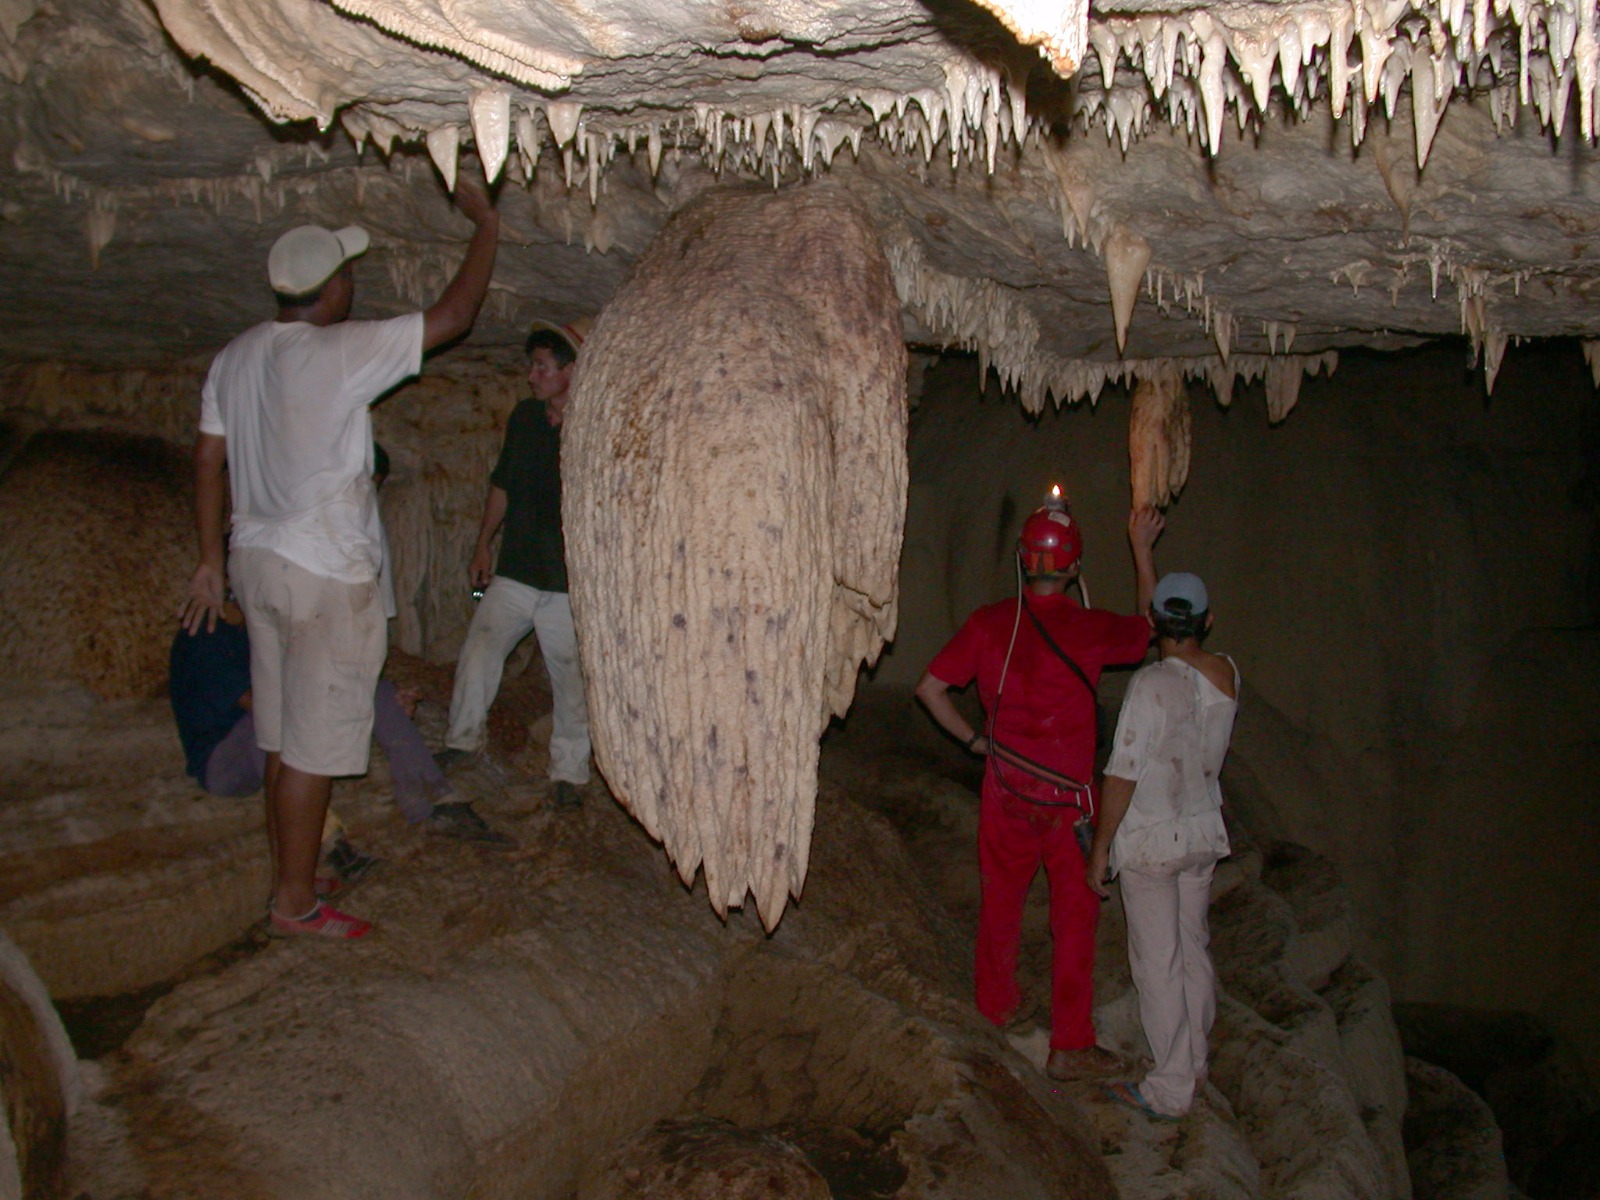 Stalagmites in a cave in the Amazon (Source: Wang Xianfeng)